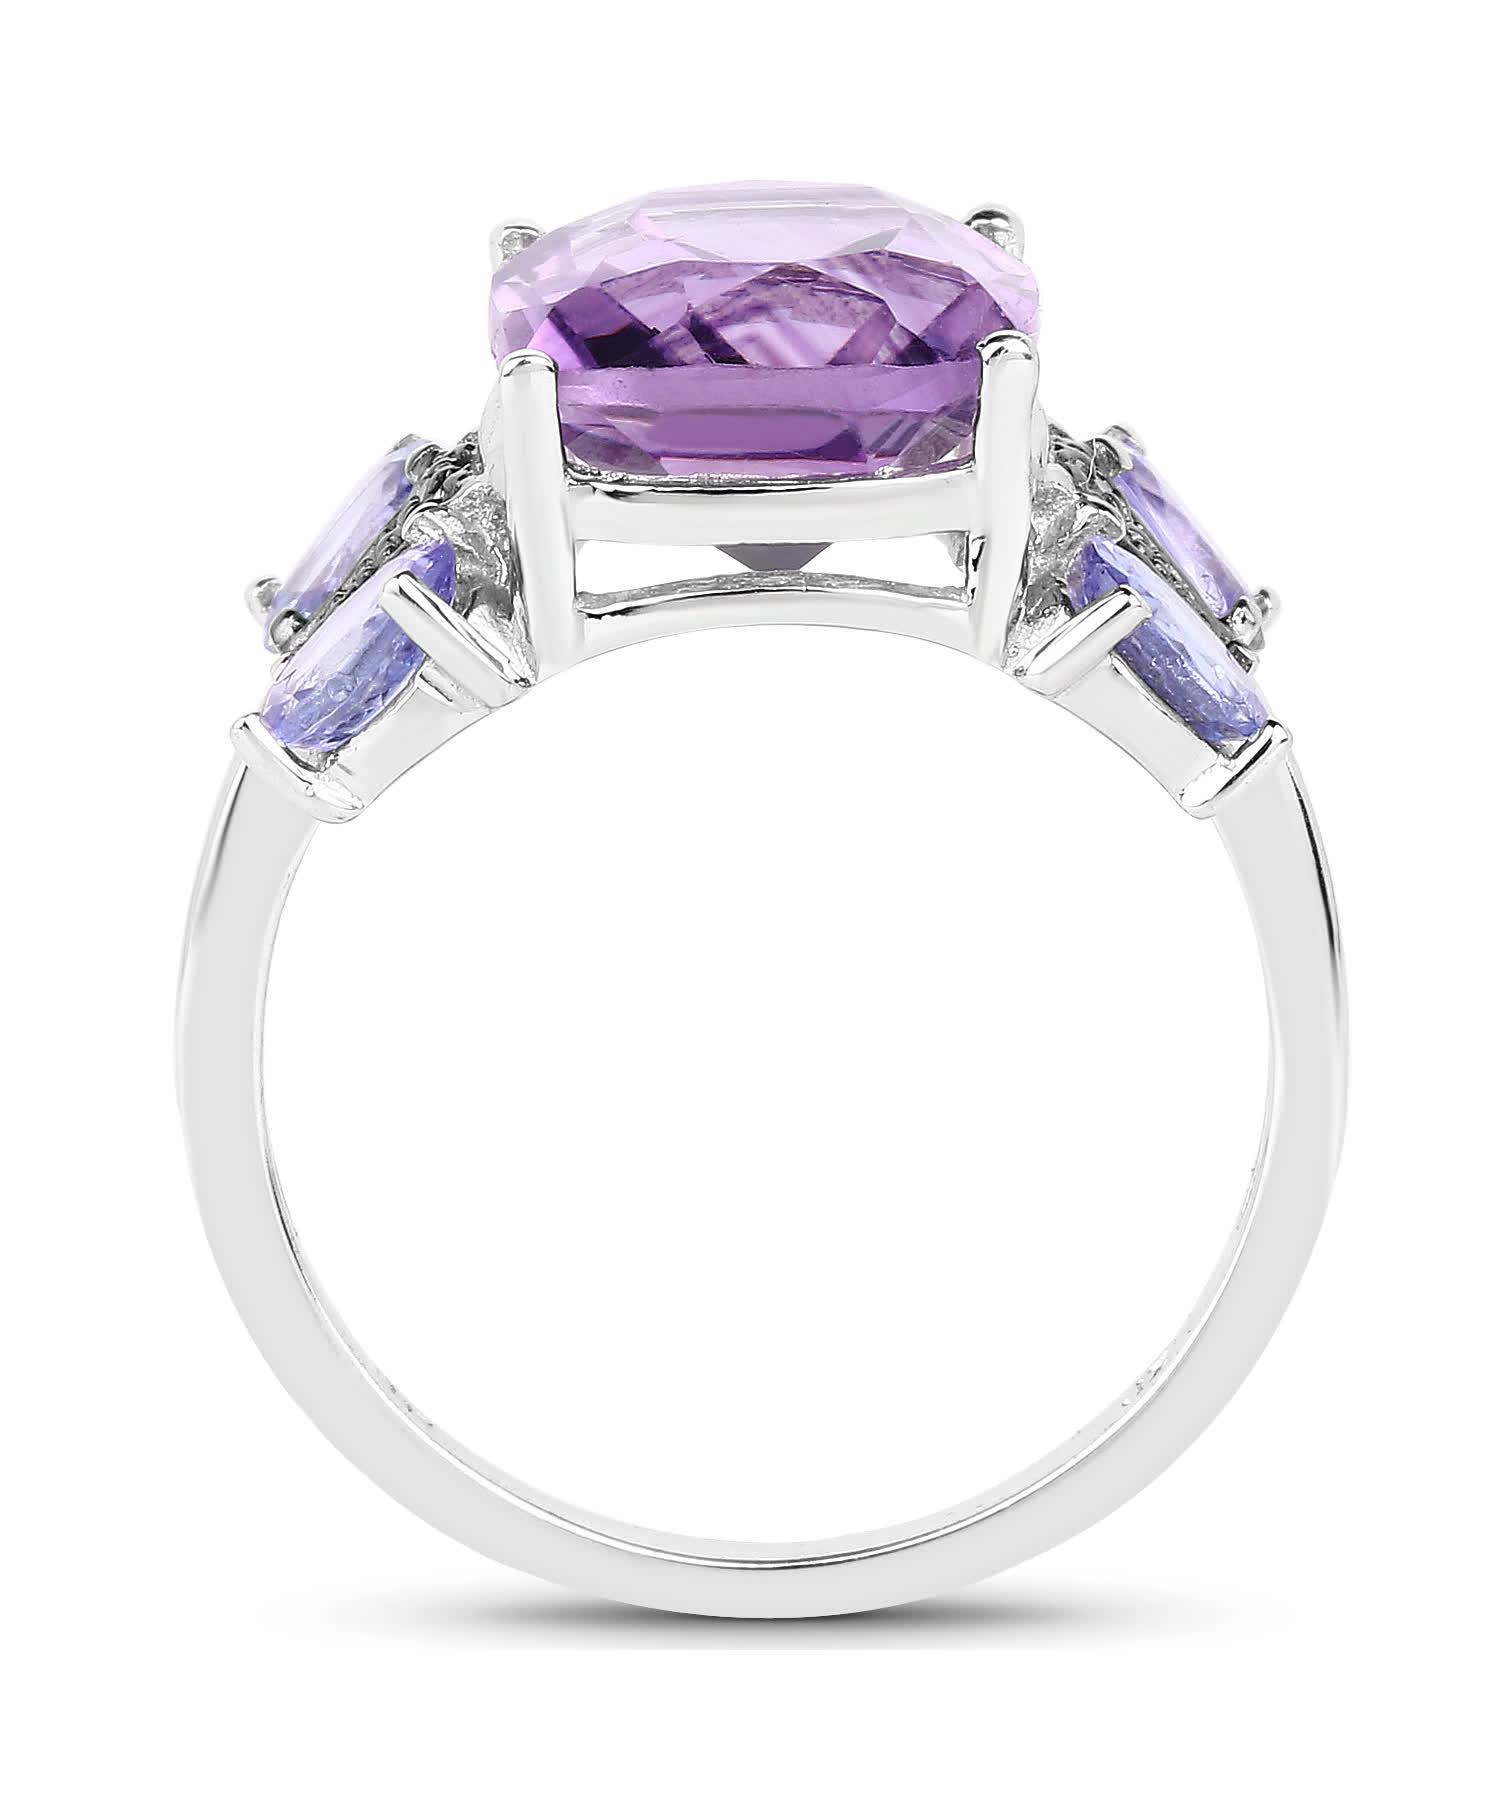 5.53ctw Natural Amethyst, Tanzanite and Topaz Rhodium Plated Silver Cocktail Ring View 2